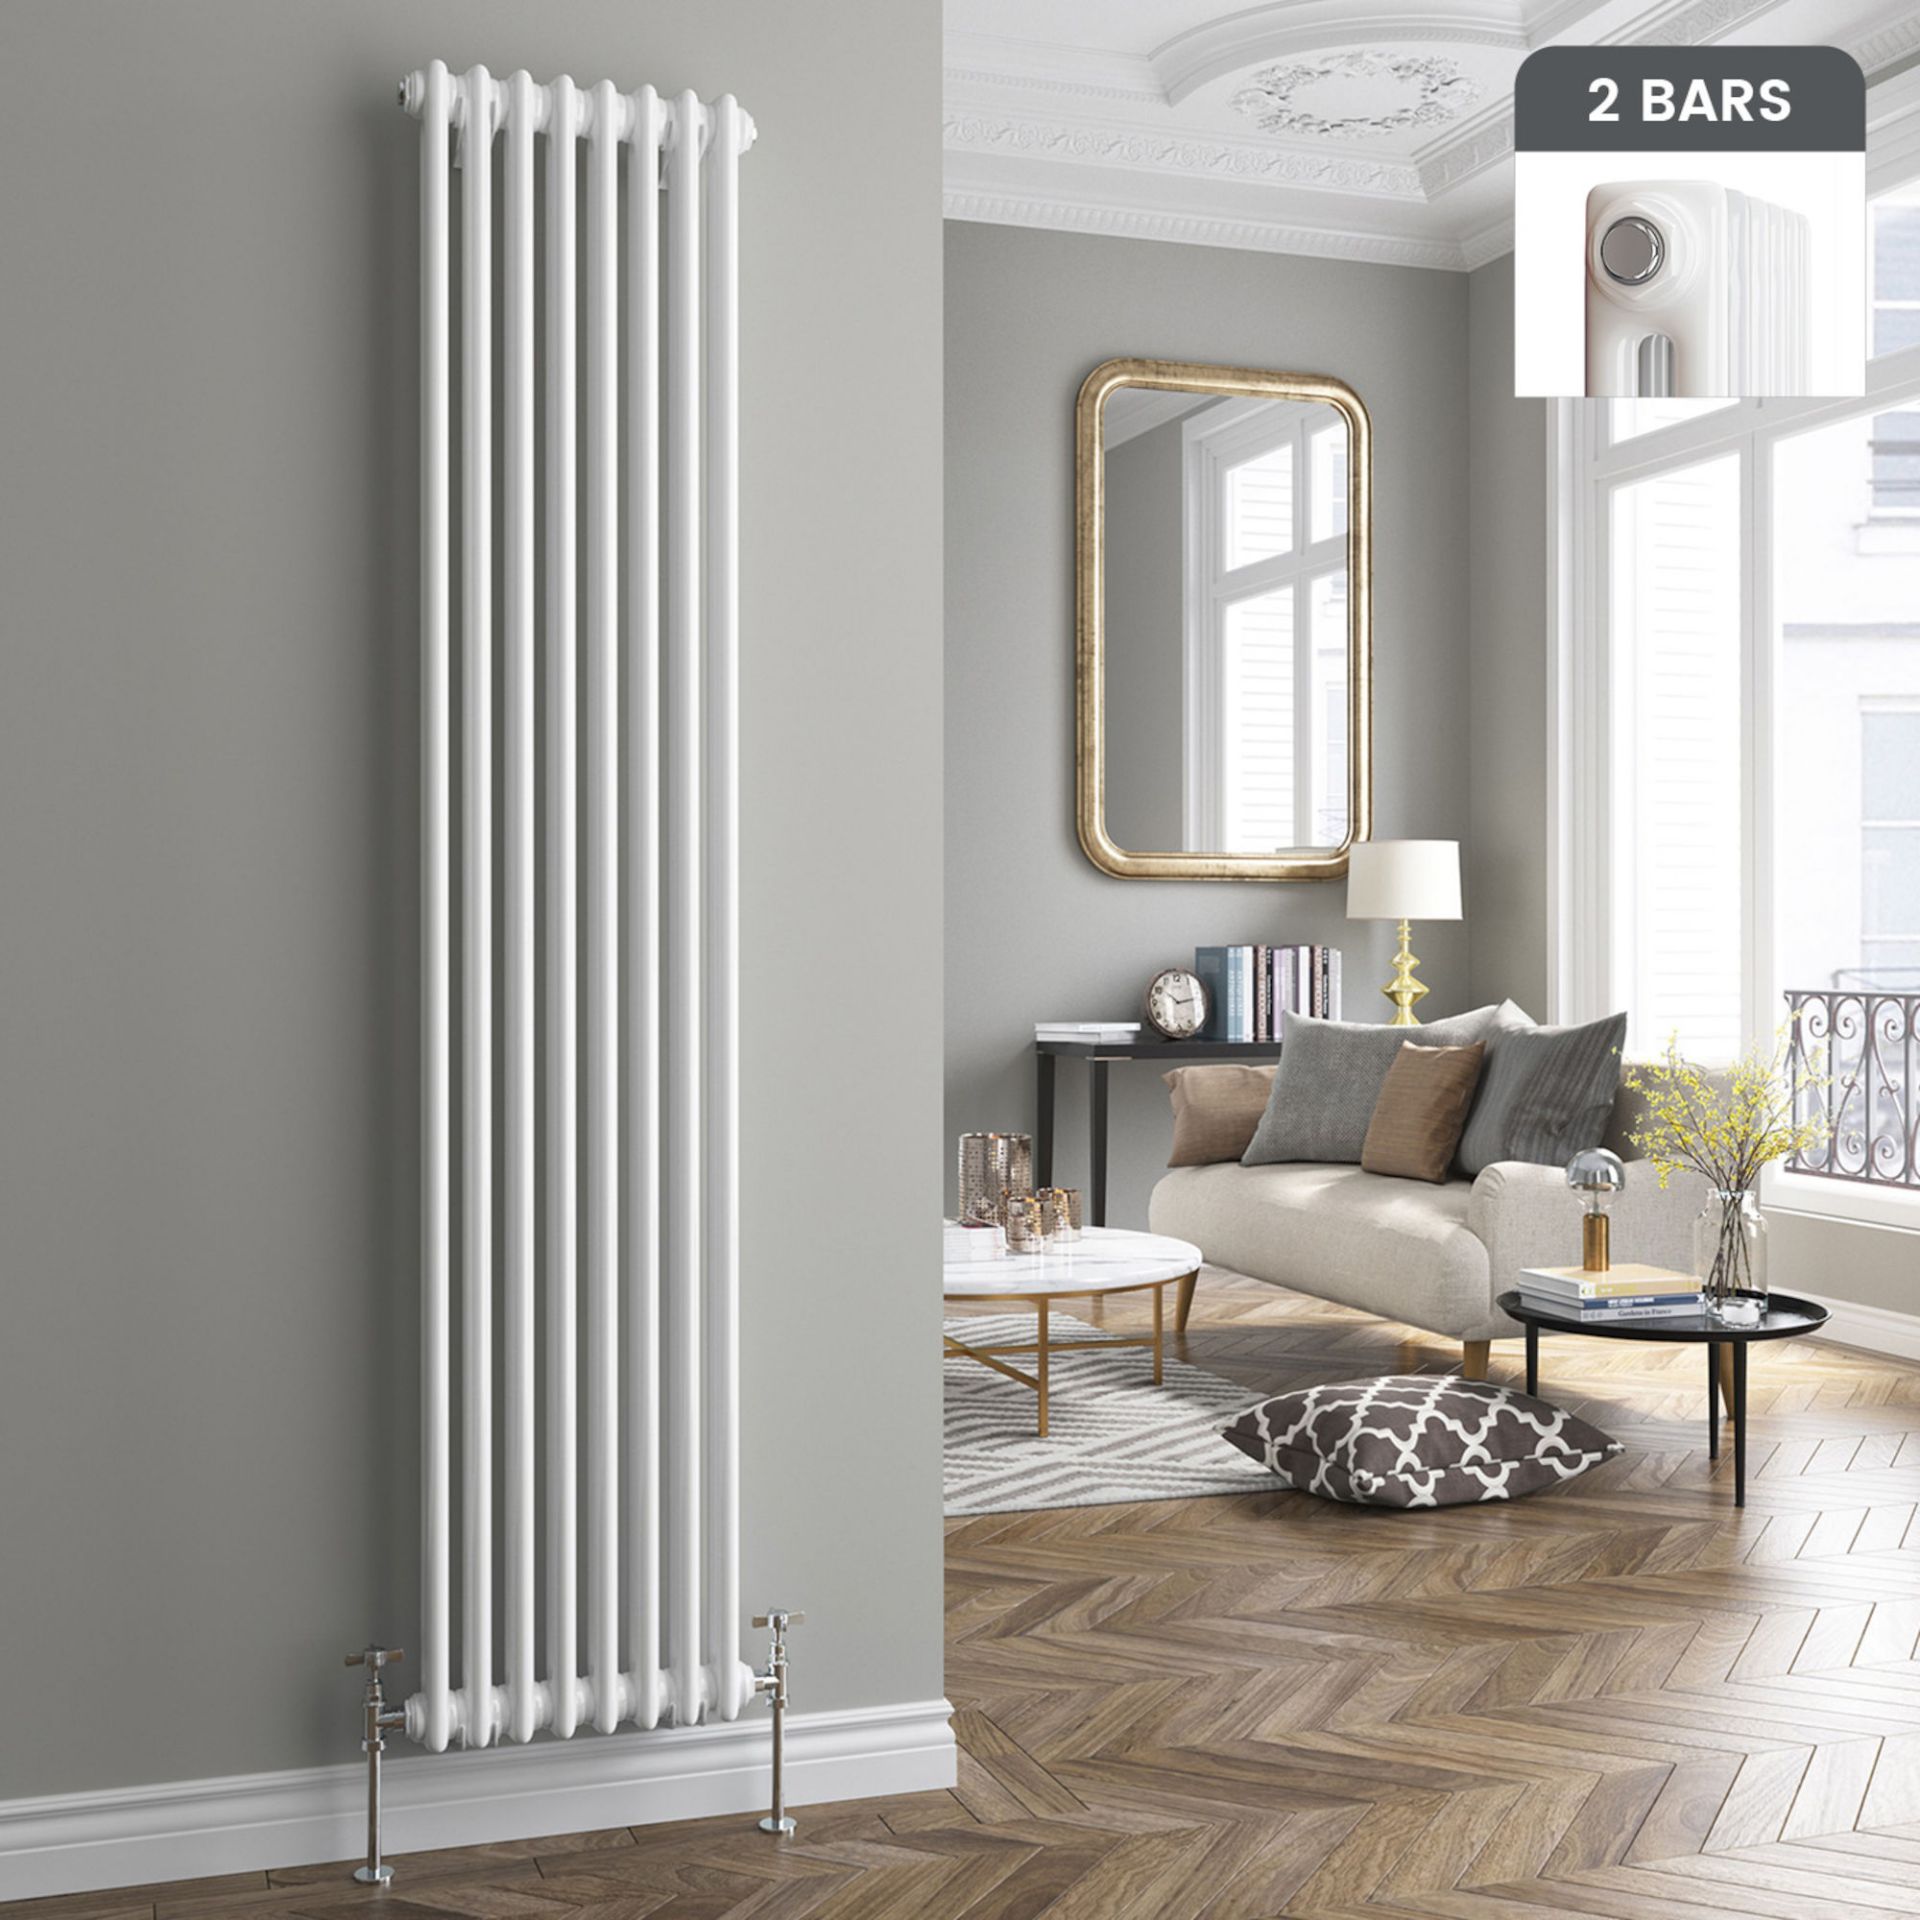 (H148) 2000x398mm White Double Panel Vertical Colosseum Traditional Radiator. RRP £429.99. Fo...